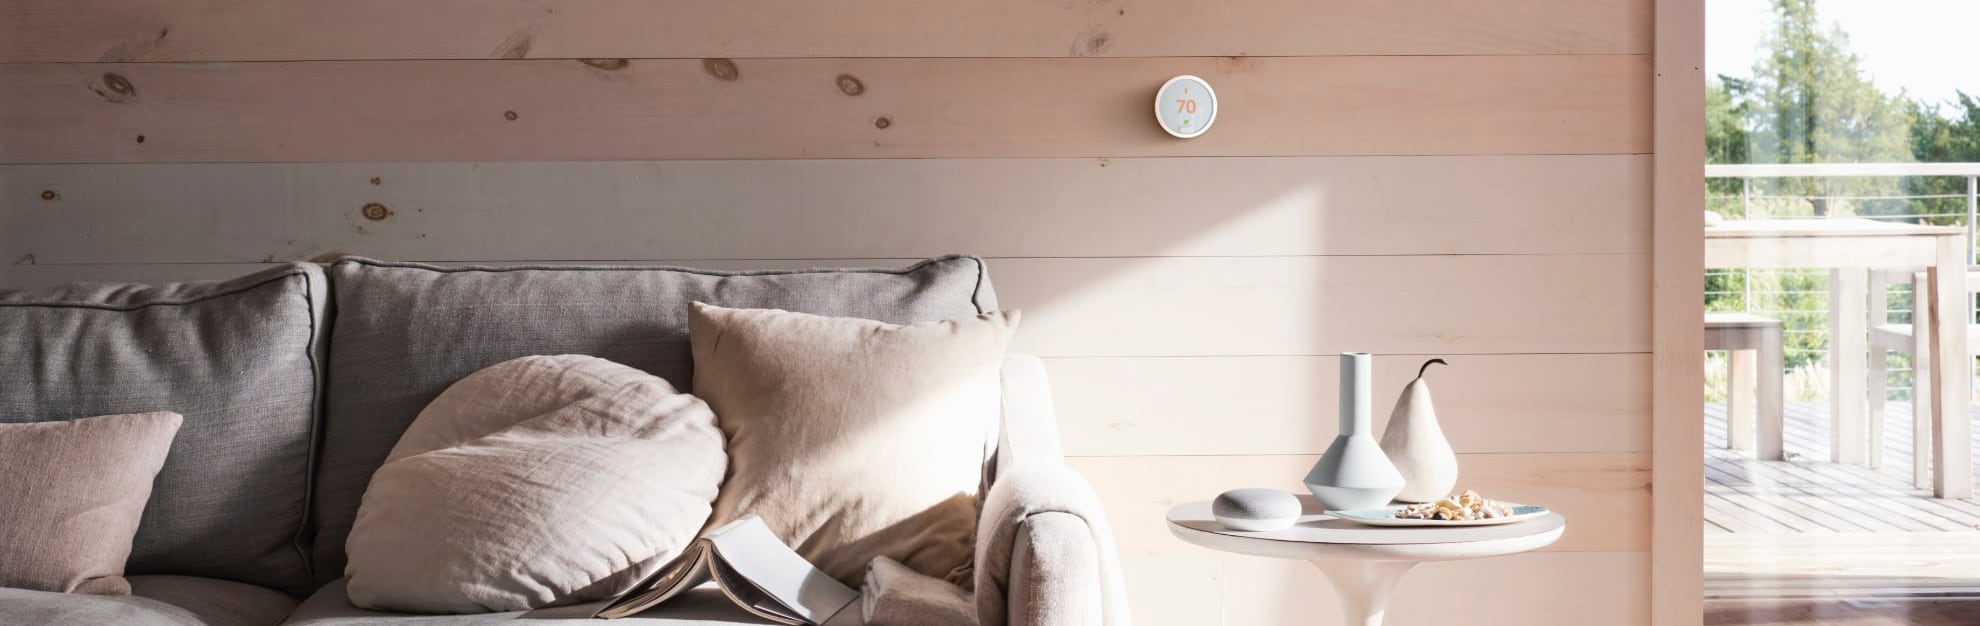 Vivint Home Automation in Provo